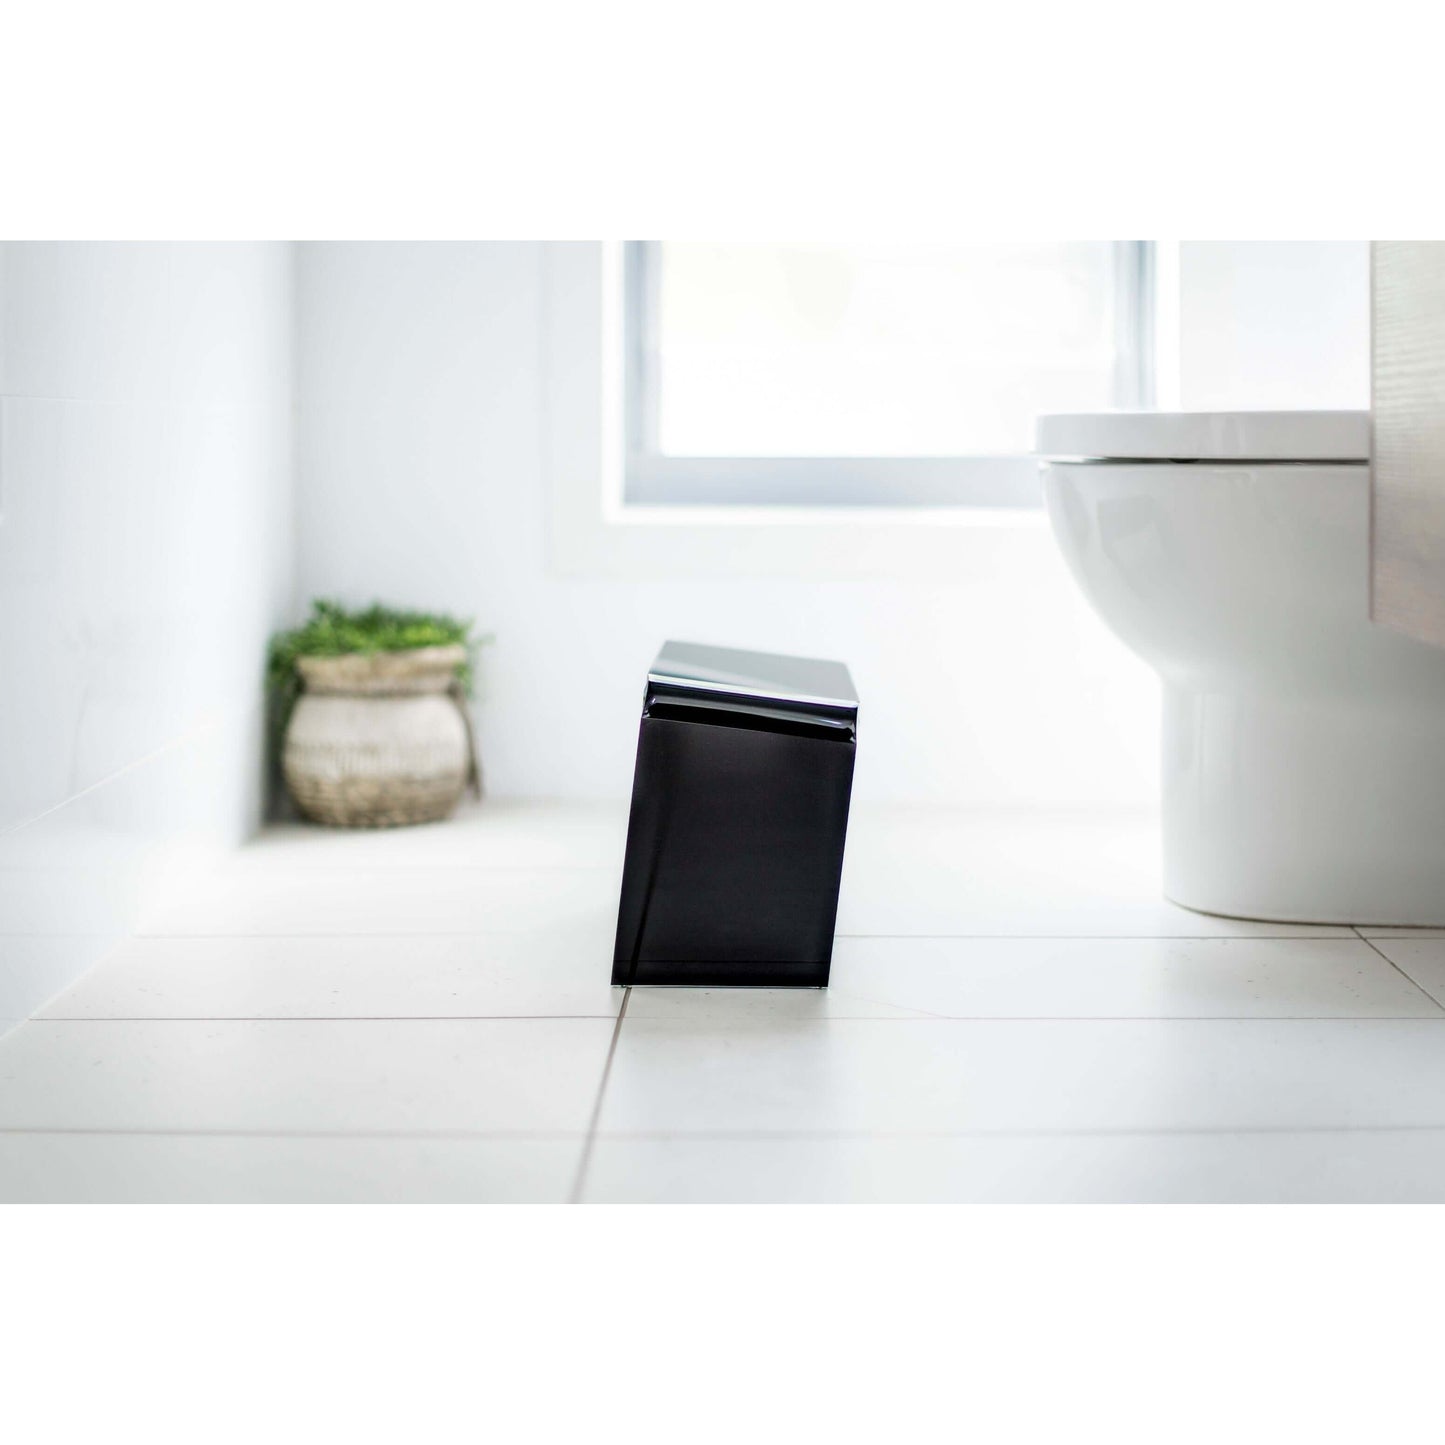 The PROPPR Acer - Black Toilet Foot Stool - side view in a bathroom